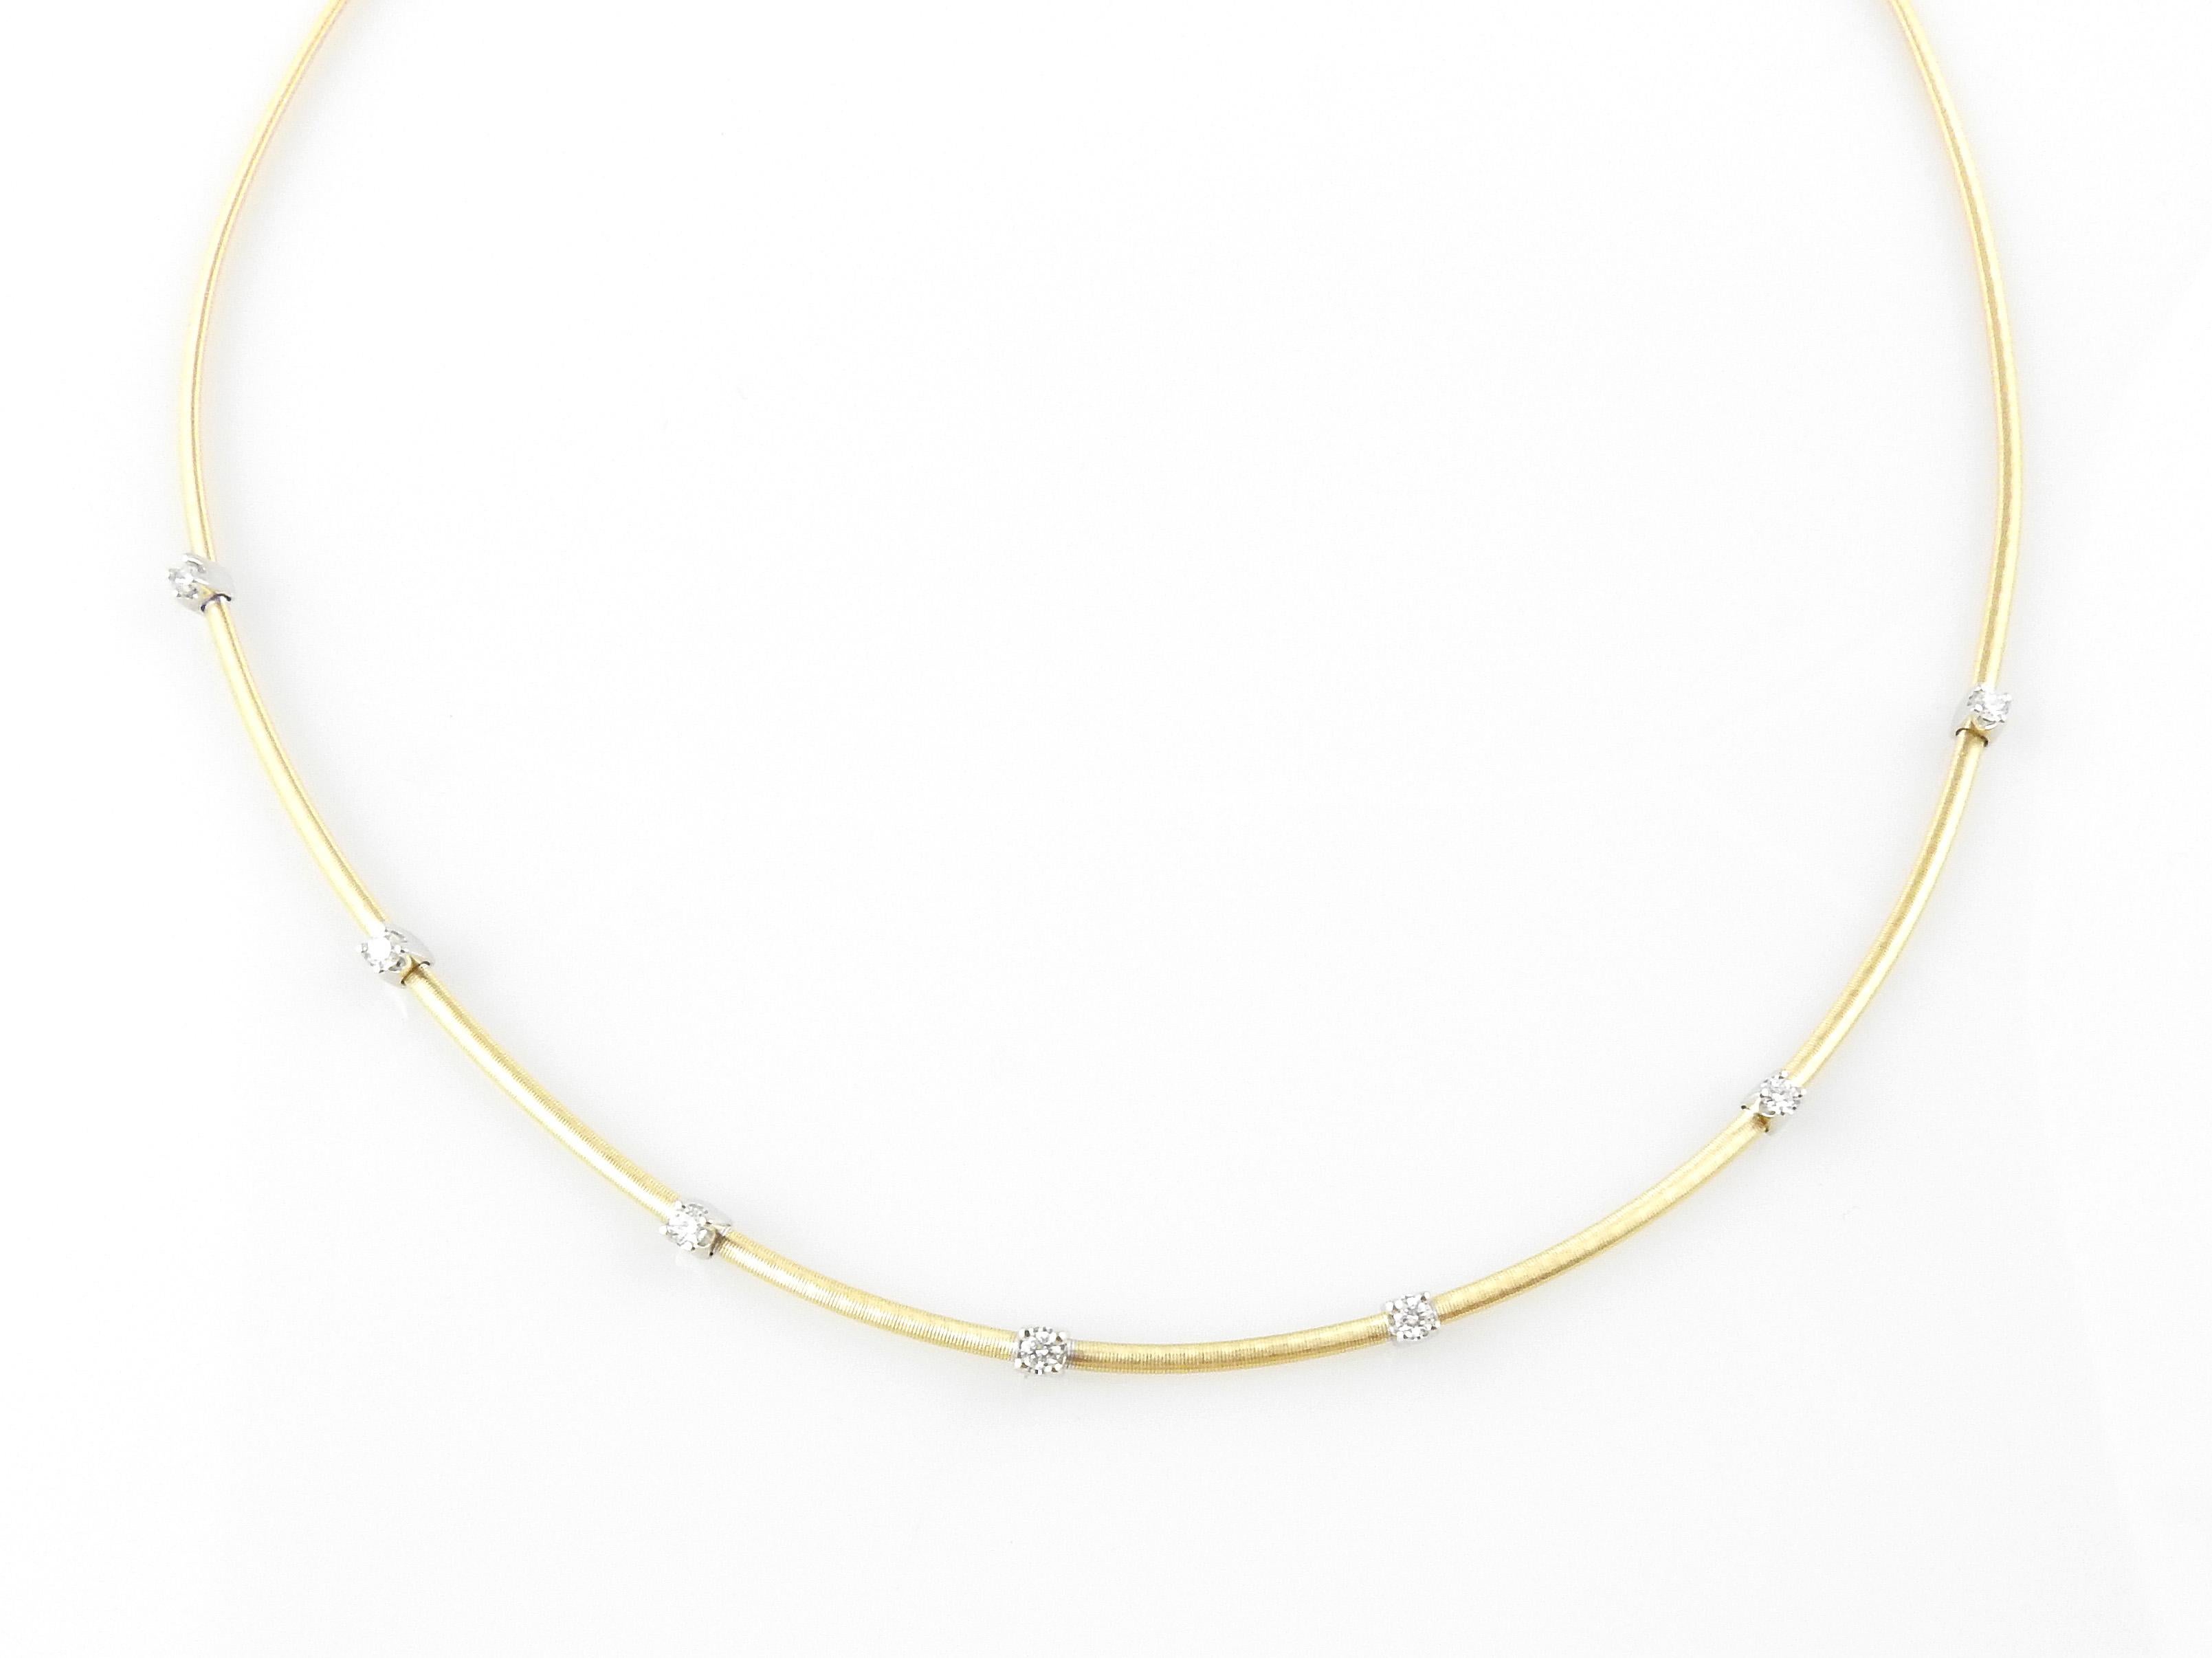 Marco Bicego 18K Yellow Gold Diamond Necklace

This beautiful Marco Bicego necklace is set in 18K yellow gold with 7 diamond stations set in 18K white gold. 

This necklace is approx. 16